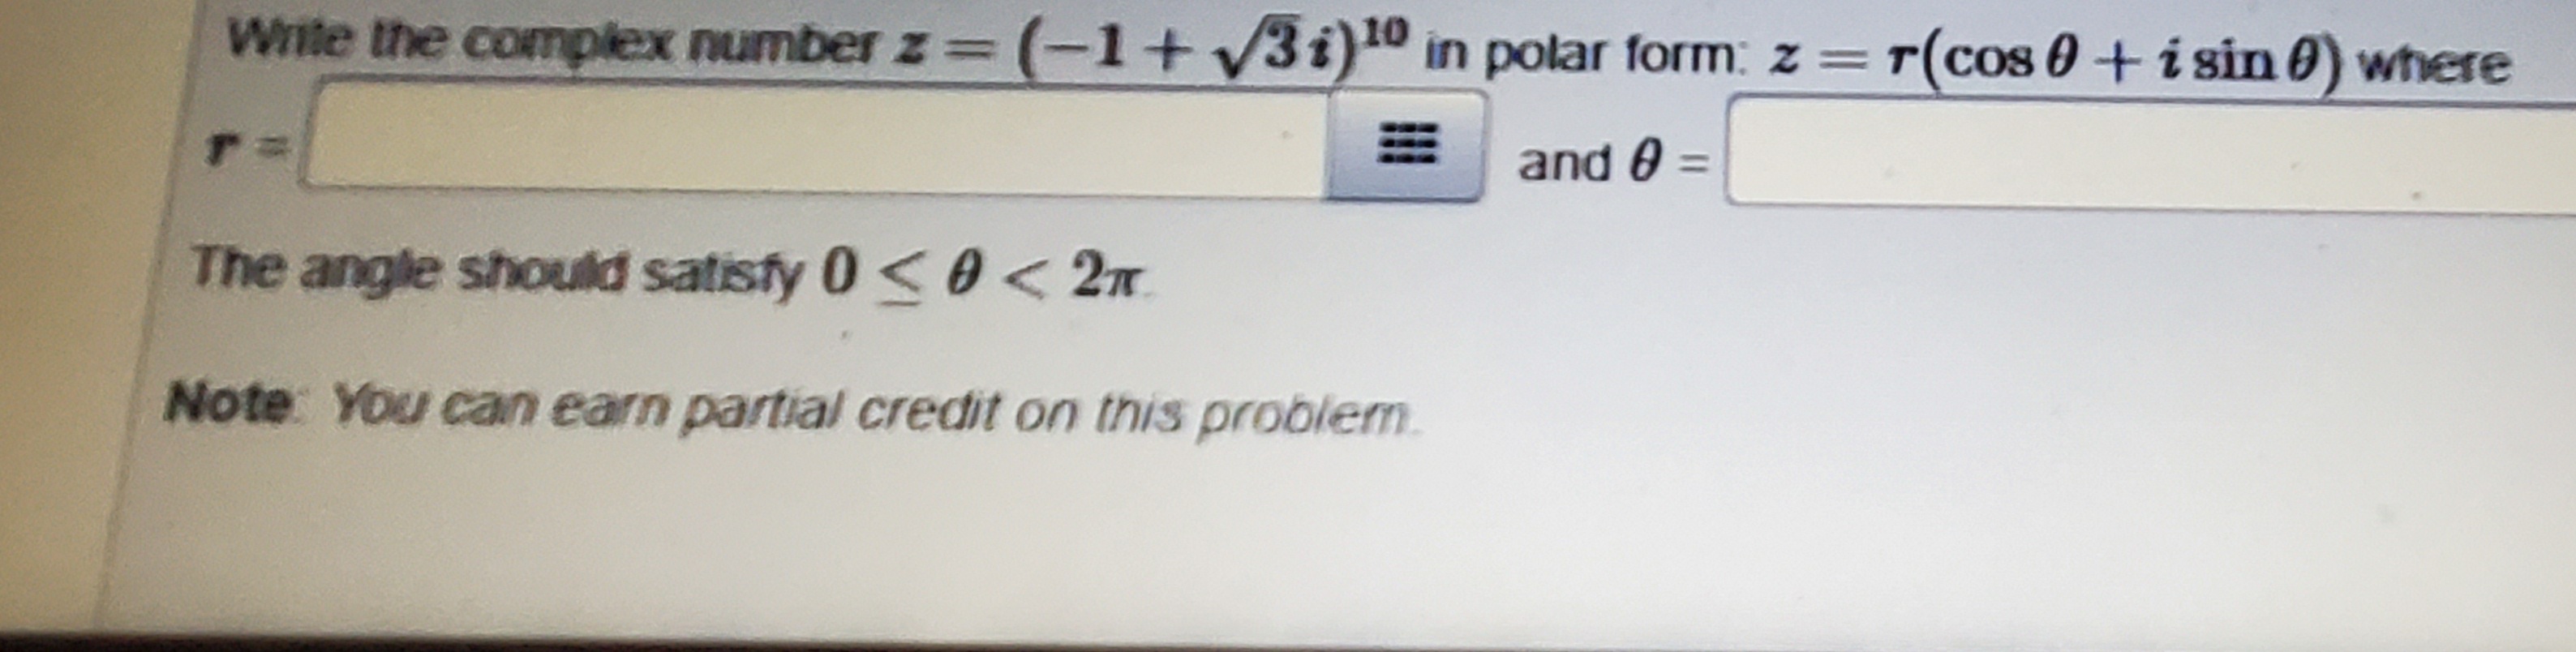 Write the complex number z =(-1+3i) in polar form: z =
T(cos 0+isin 0) where
and 0
The angle should satisfy 0< 0 < 2n.
Note You can earn partial credit on this problem.
